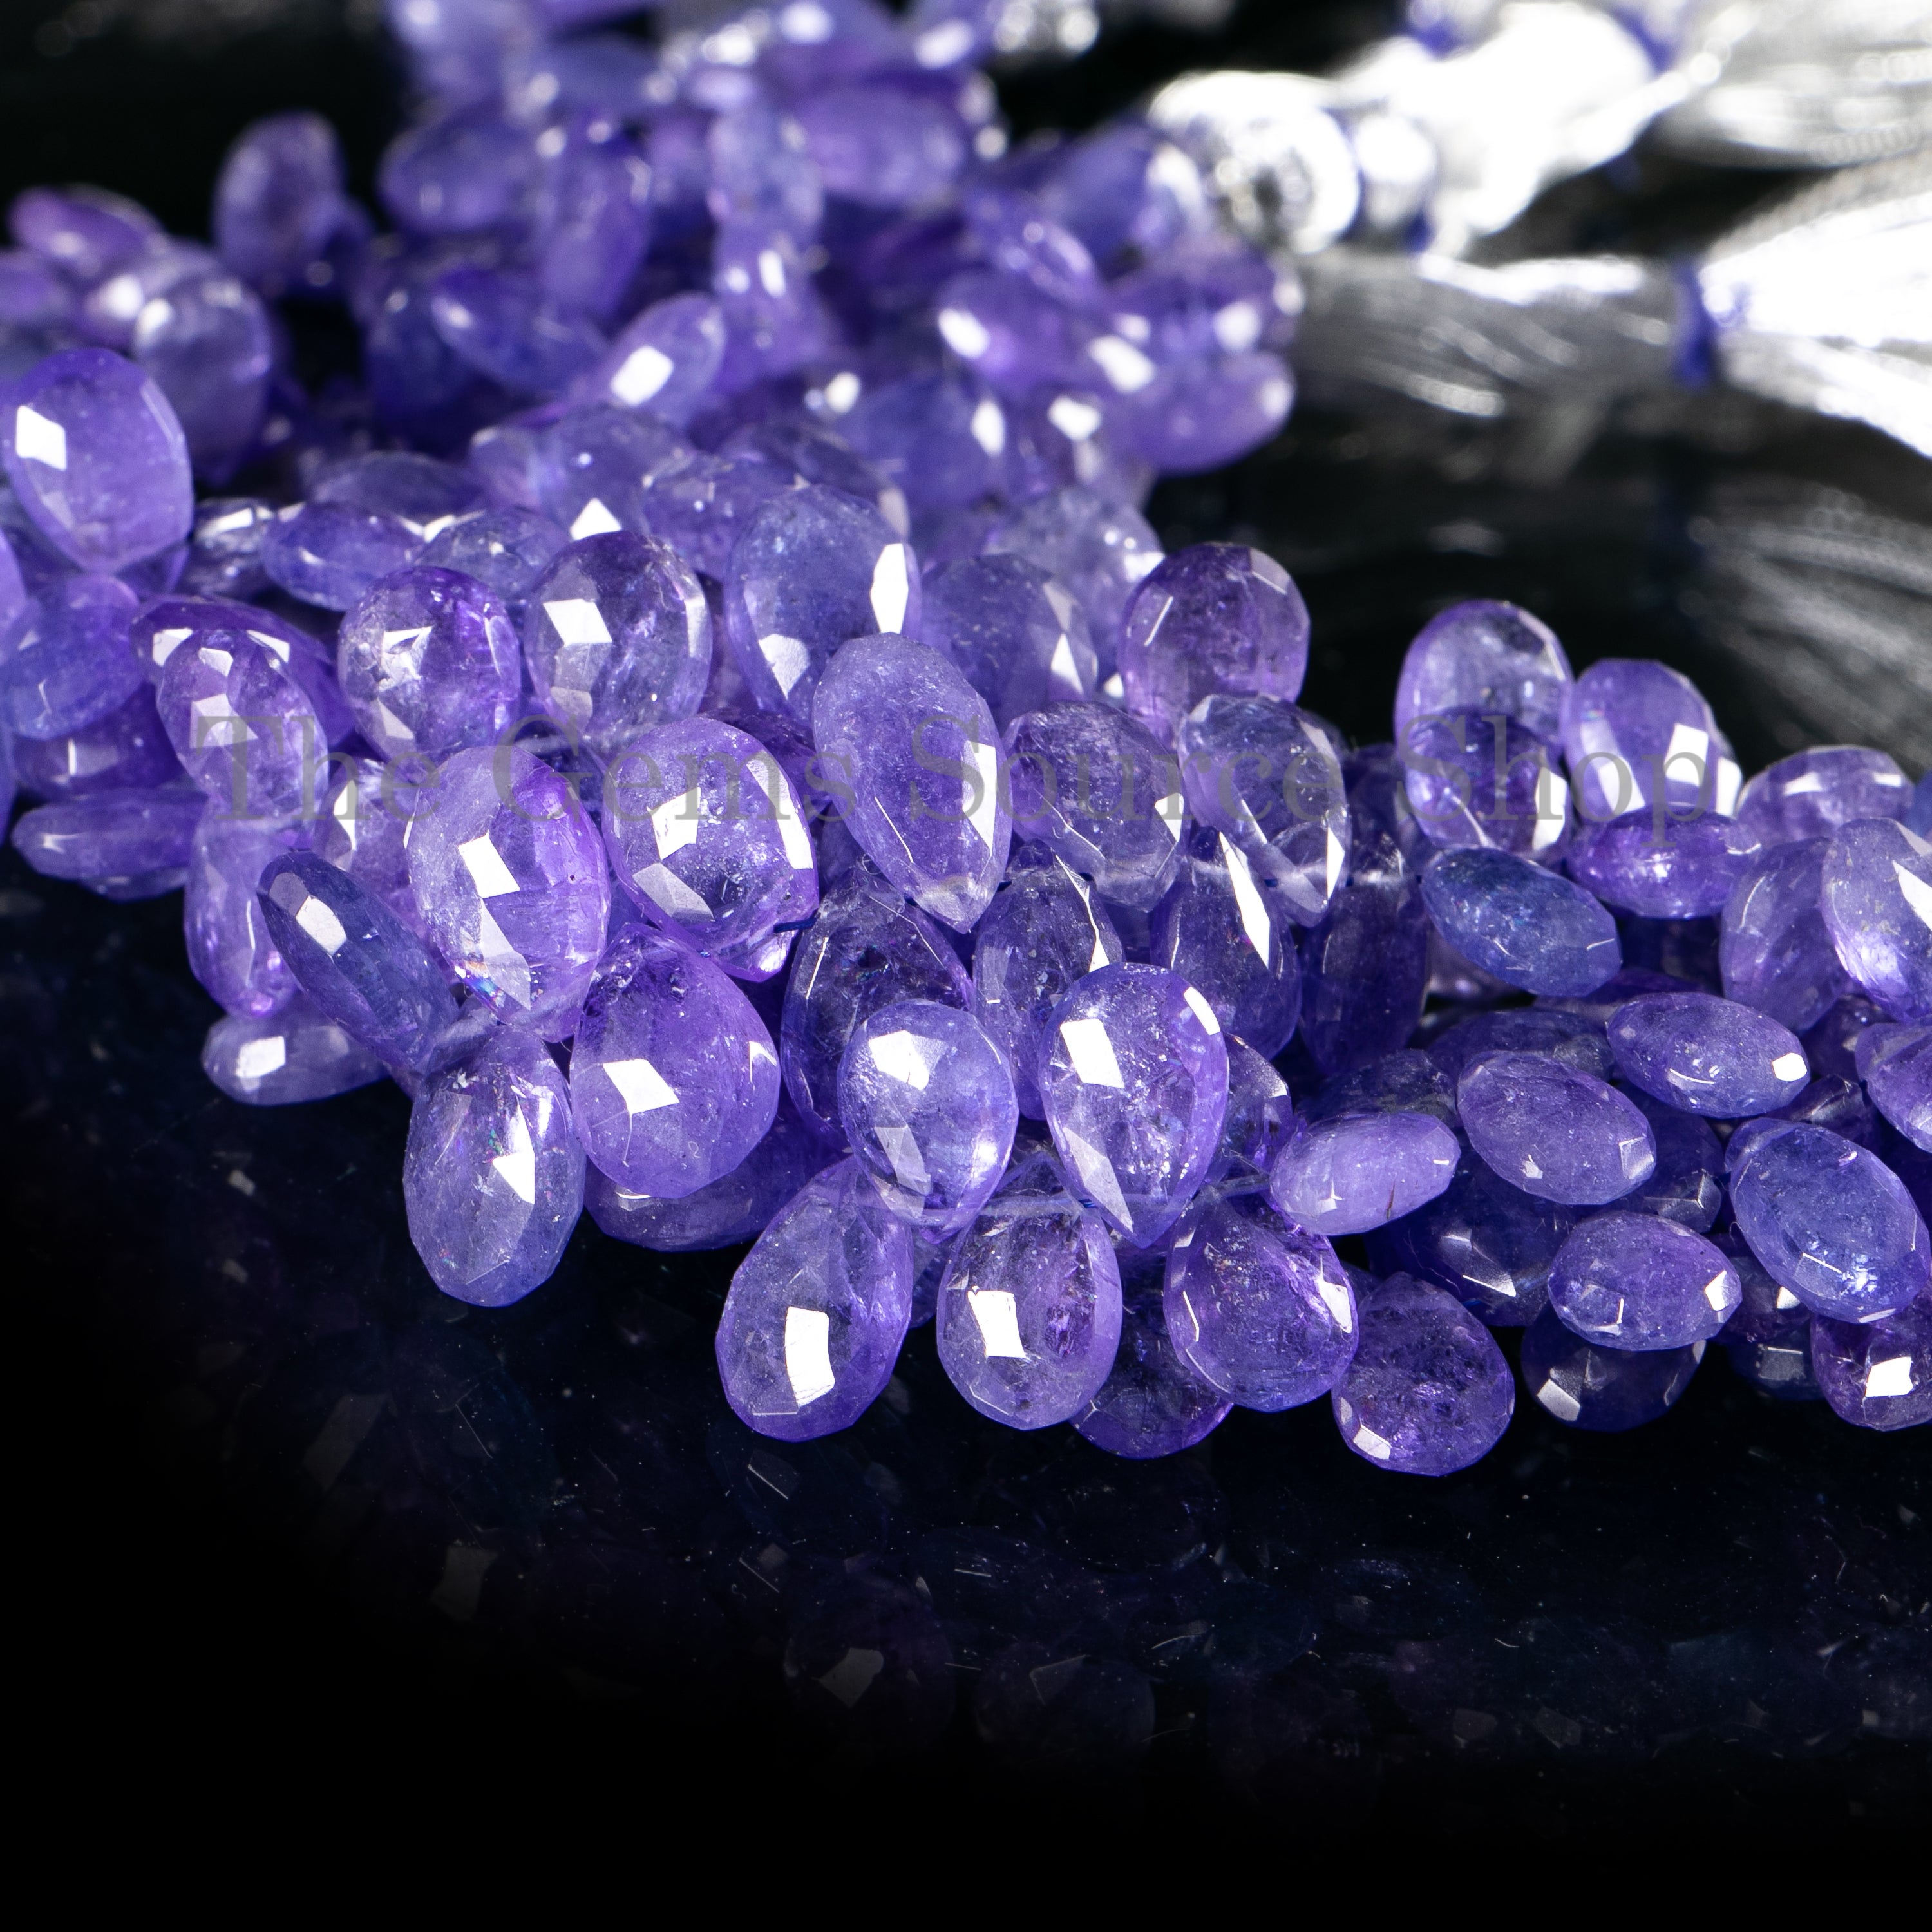 4.5x6-7x12 mm Tanzanite Faceted Pear Shape Gemstone Beads TGS-4699